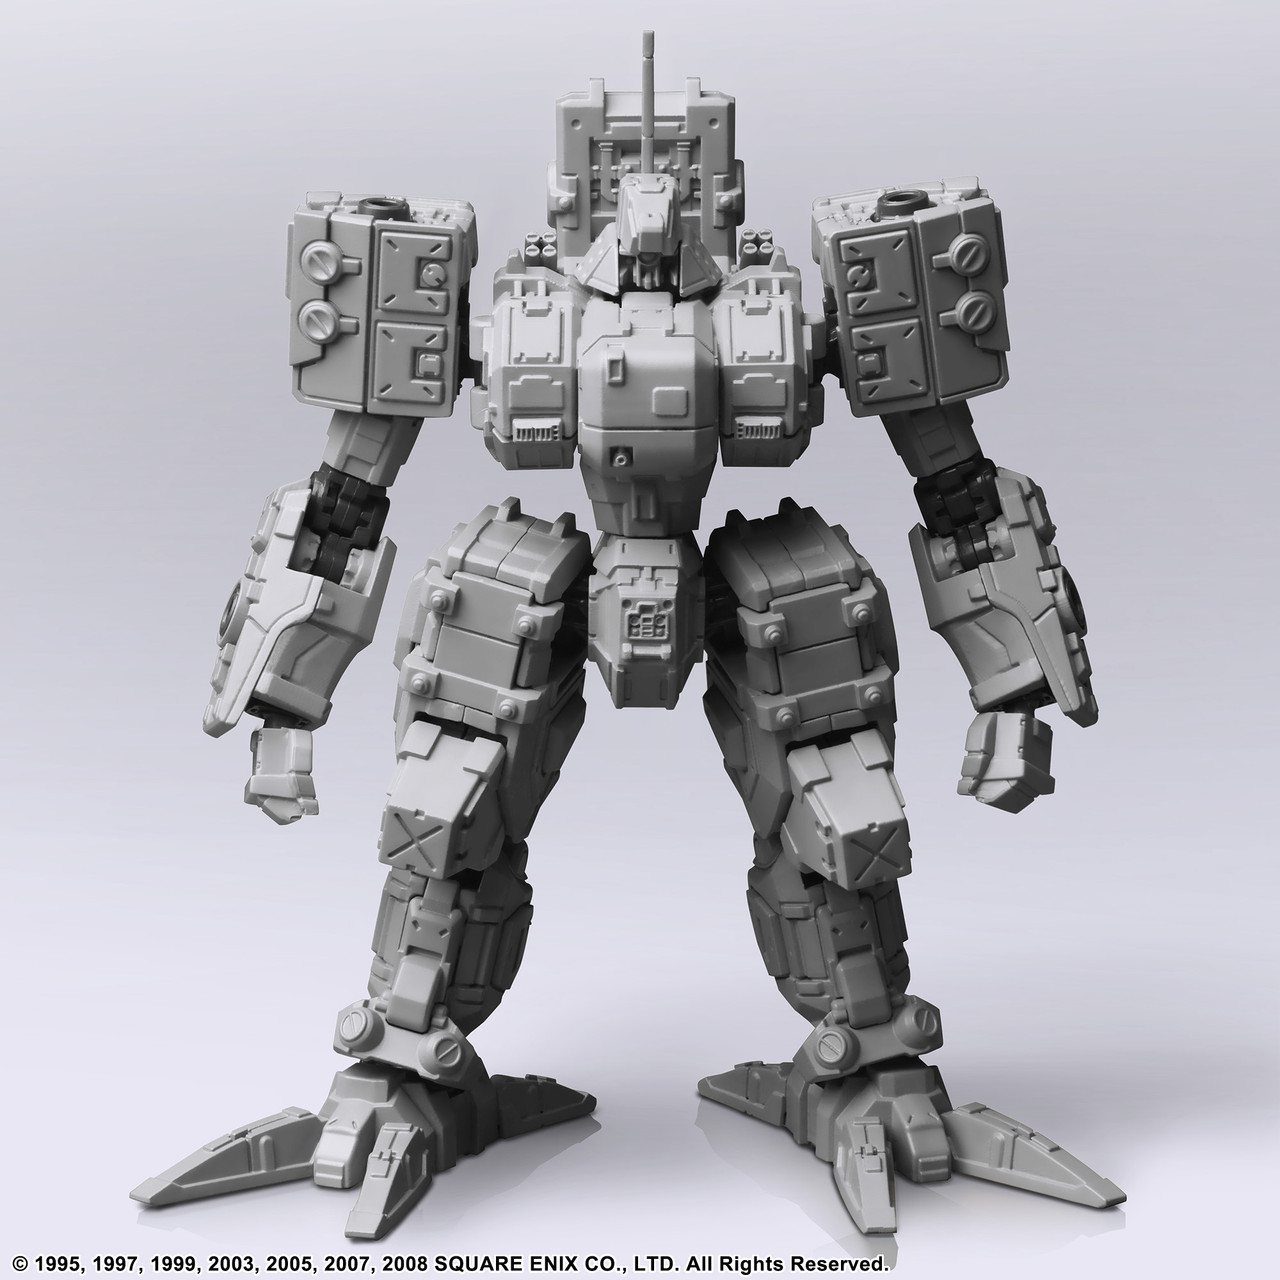 FRONT MISSION STRUCTURE ARTS 1/72 SCALE PLASTIC MODEL KIT SERIES Vol.3  LIGHT GRAY COLOR VARIANT - GRILLE SECHS